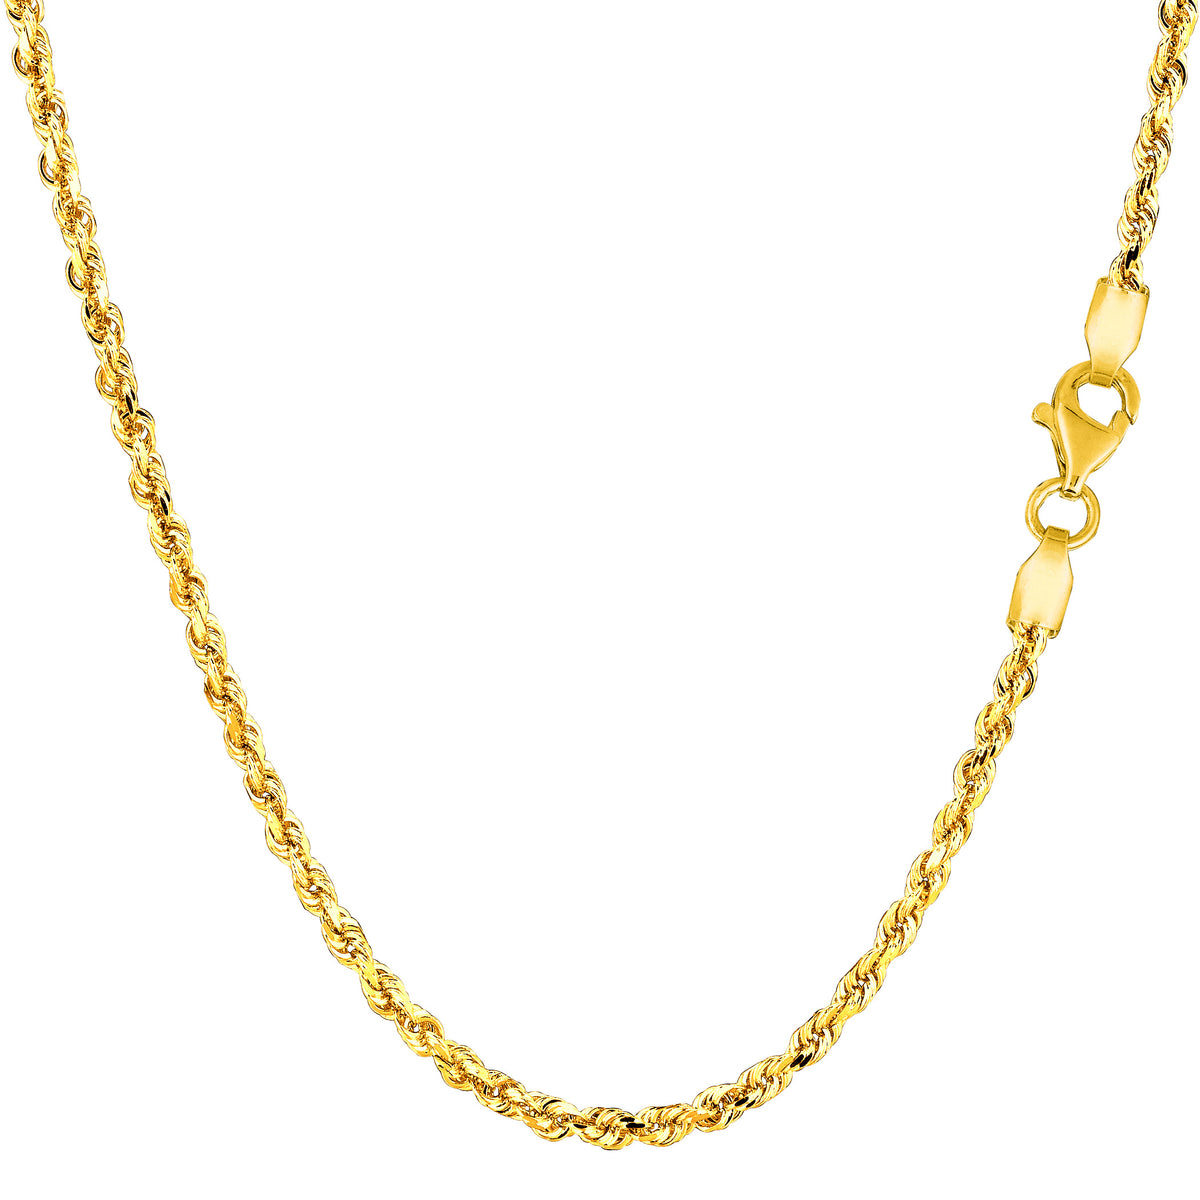 14K Yellow Gold Filled Solid Rope Chain Necklace, 2.1mm Wide fine designer jewelry for men and women